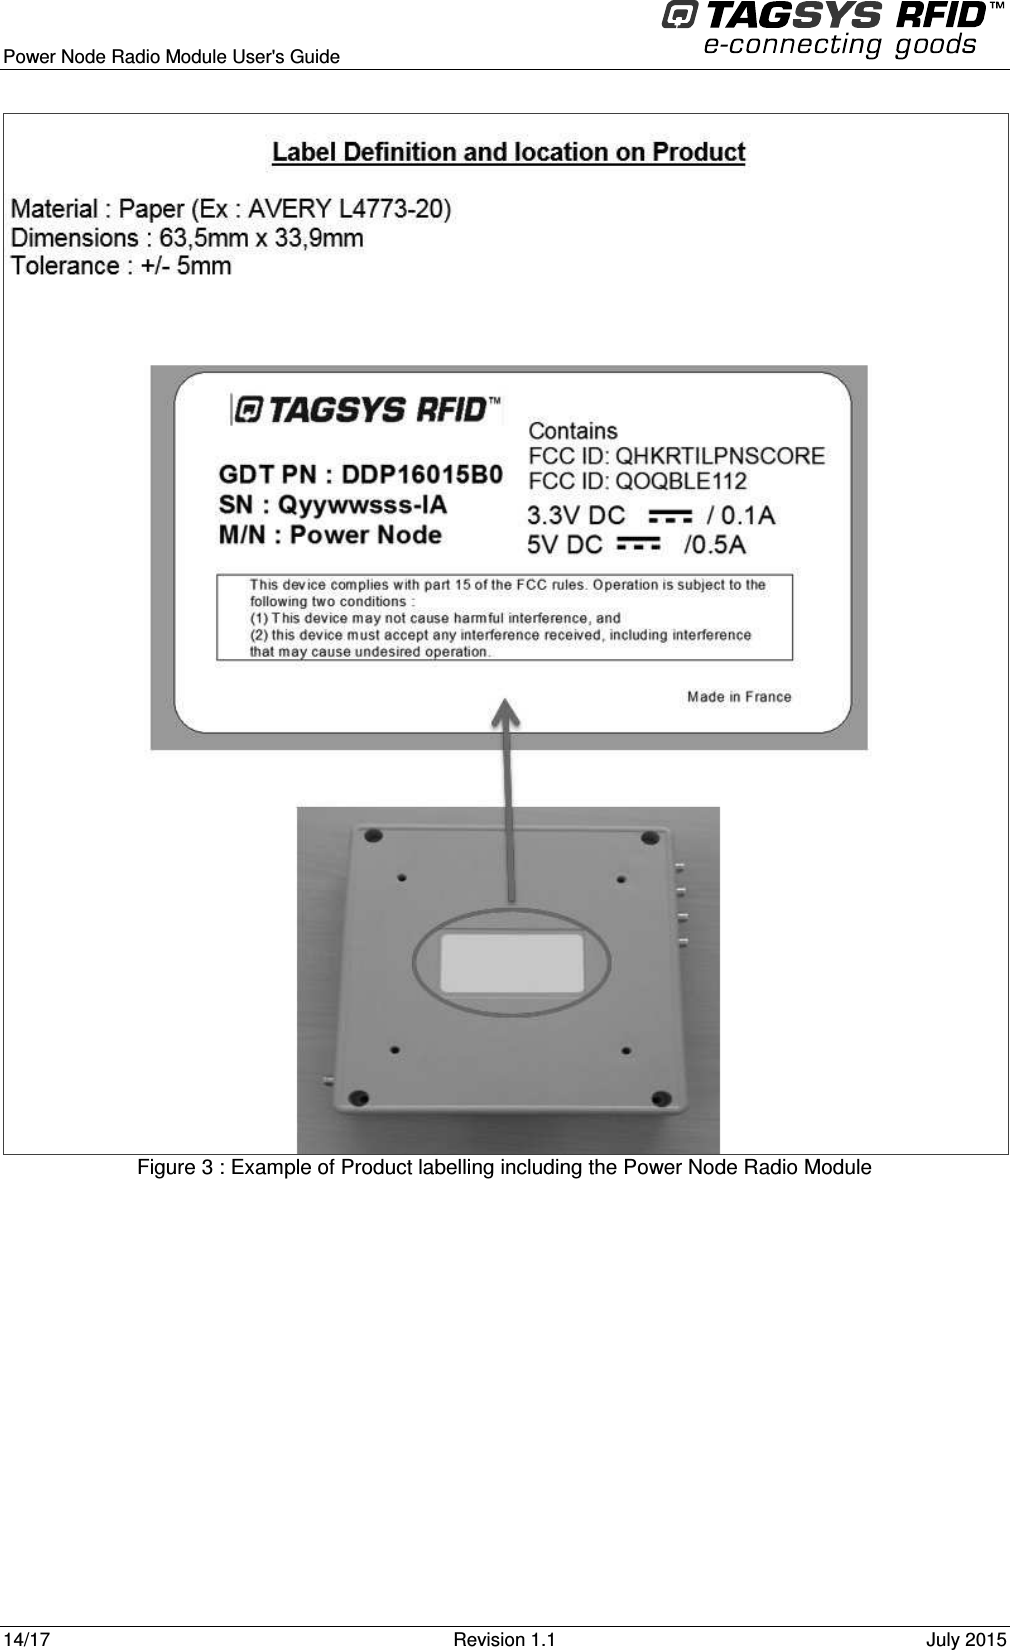  Power Node Radio Module User&apos;s Guide     14/17  Revision 1.1  July 2015   Figure 3 : Example of Product labelling including the Power Node Radio Module  